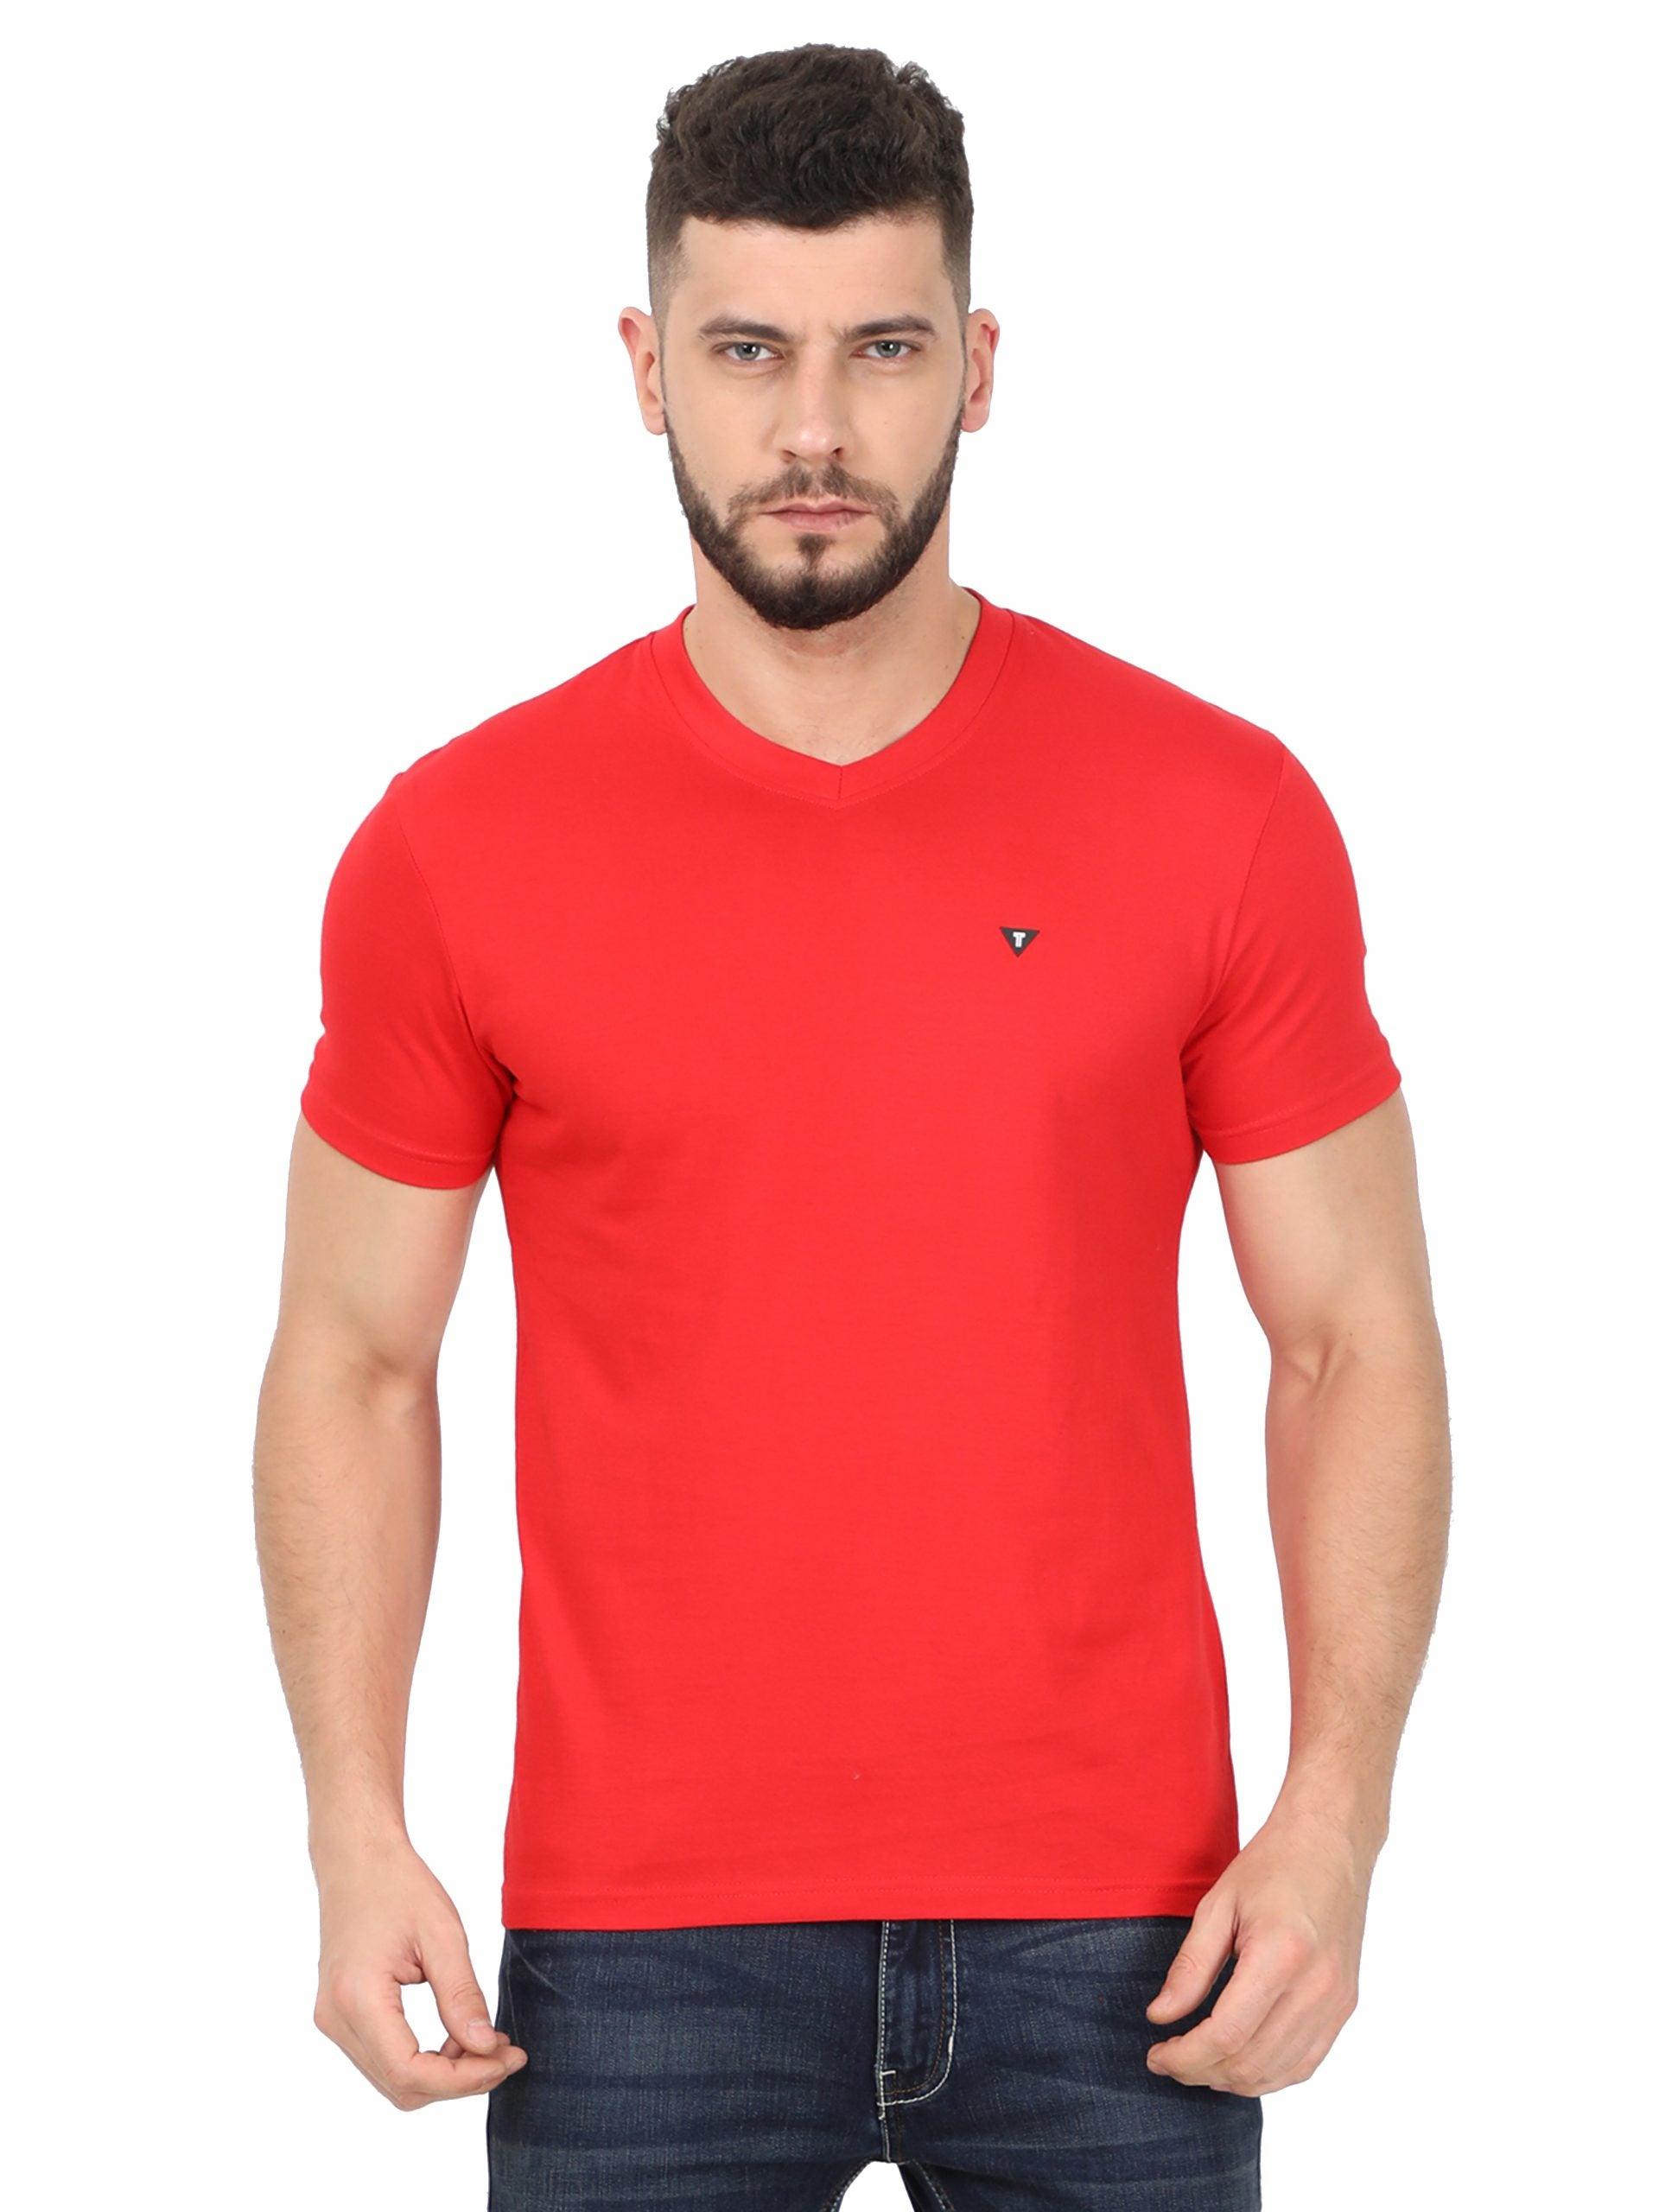 mens red t shirt